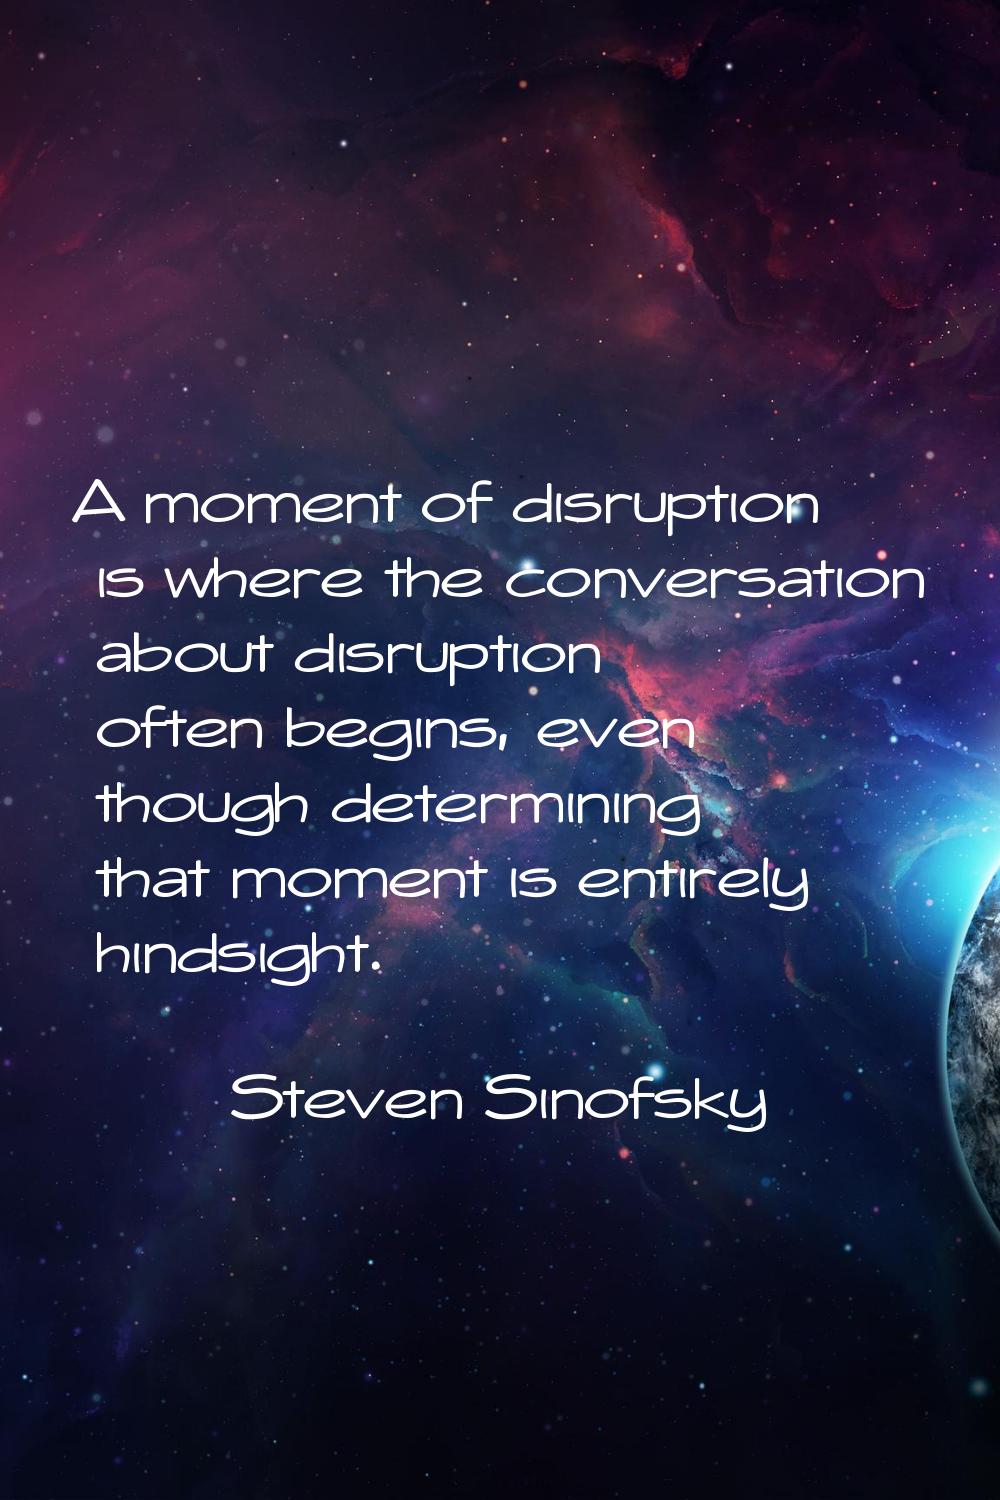 A moment of disruption is where the conversation about disruption often begins, even though determi